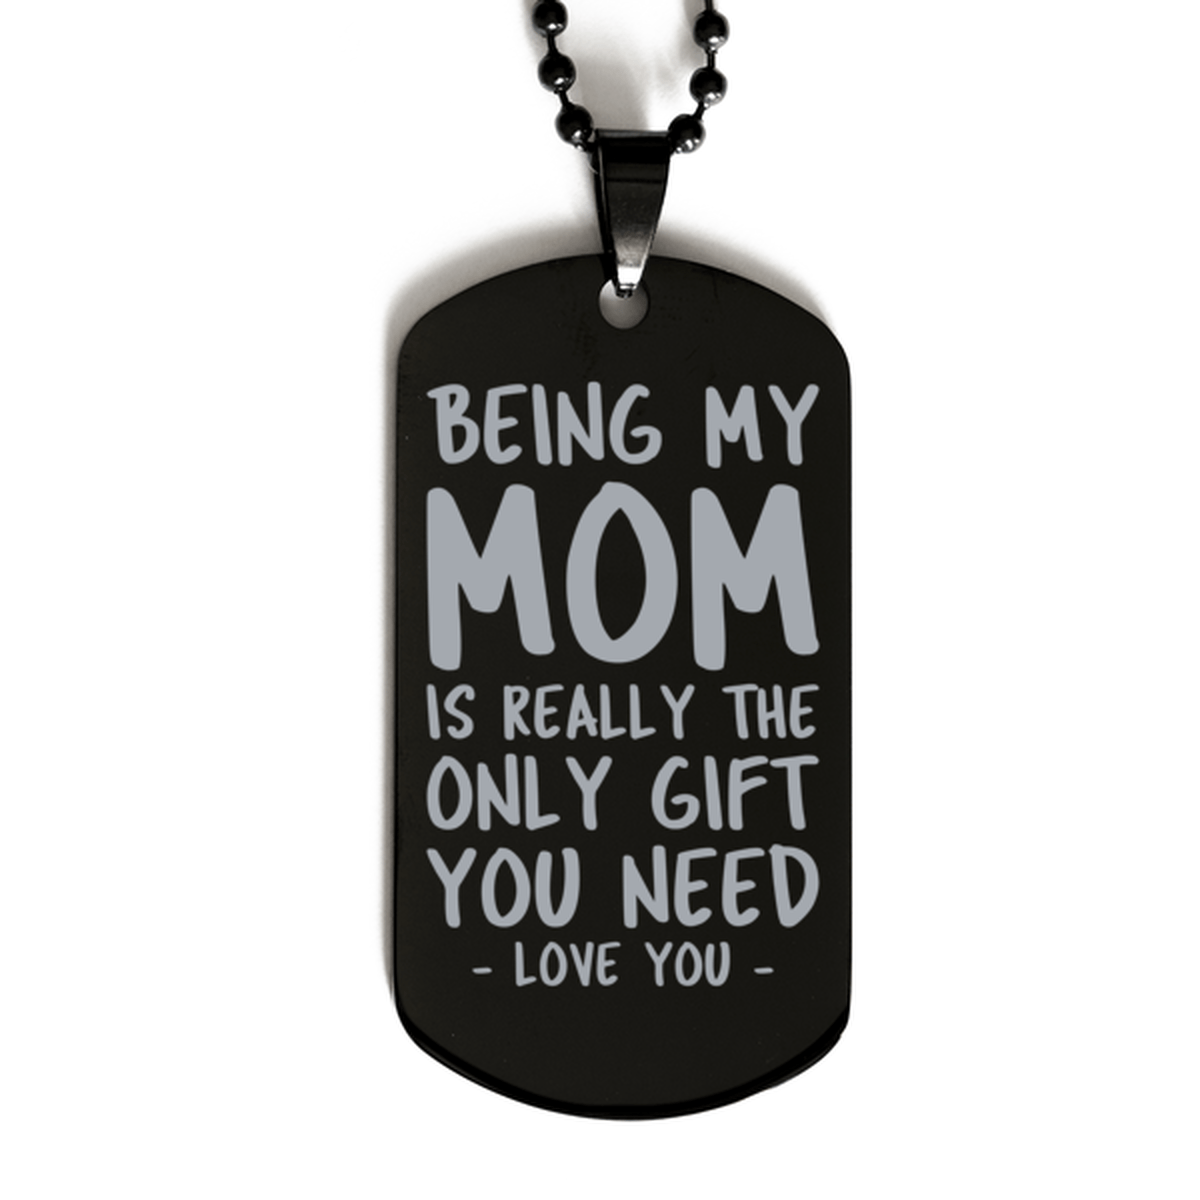 Funny Mom Black Dog Tag Necklace, Being My Mom Is Really the Only Gift You Need, Best Birthday Gifts for Mom